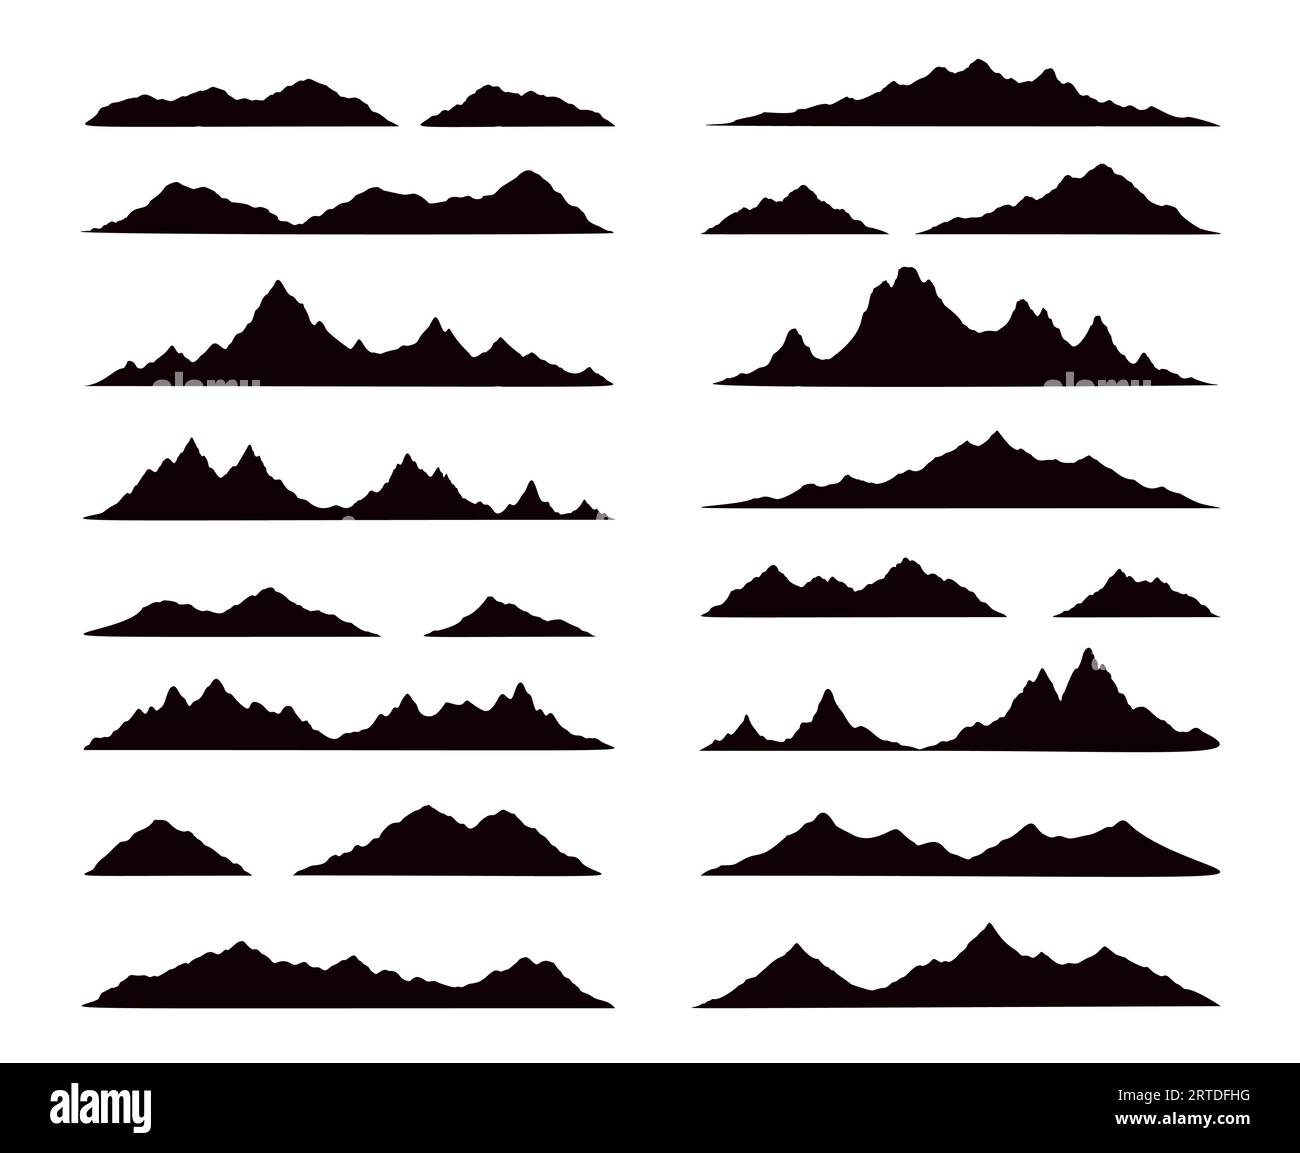 Mountain range black silhouettes, rocky landscape shapes. Isolated vector range of hills, monochrome ridges. Alps with summit peaks set of elements for adventure, rocks climbing, travel and hiking Stock Vector